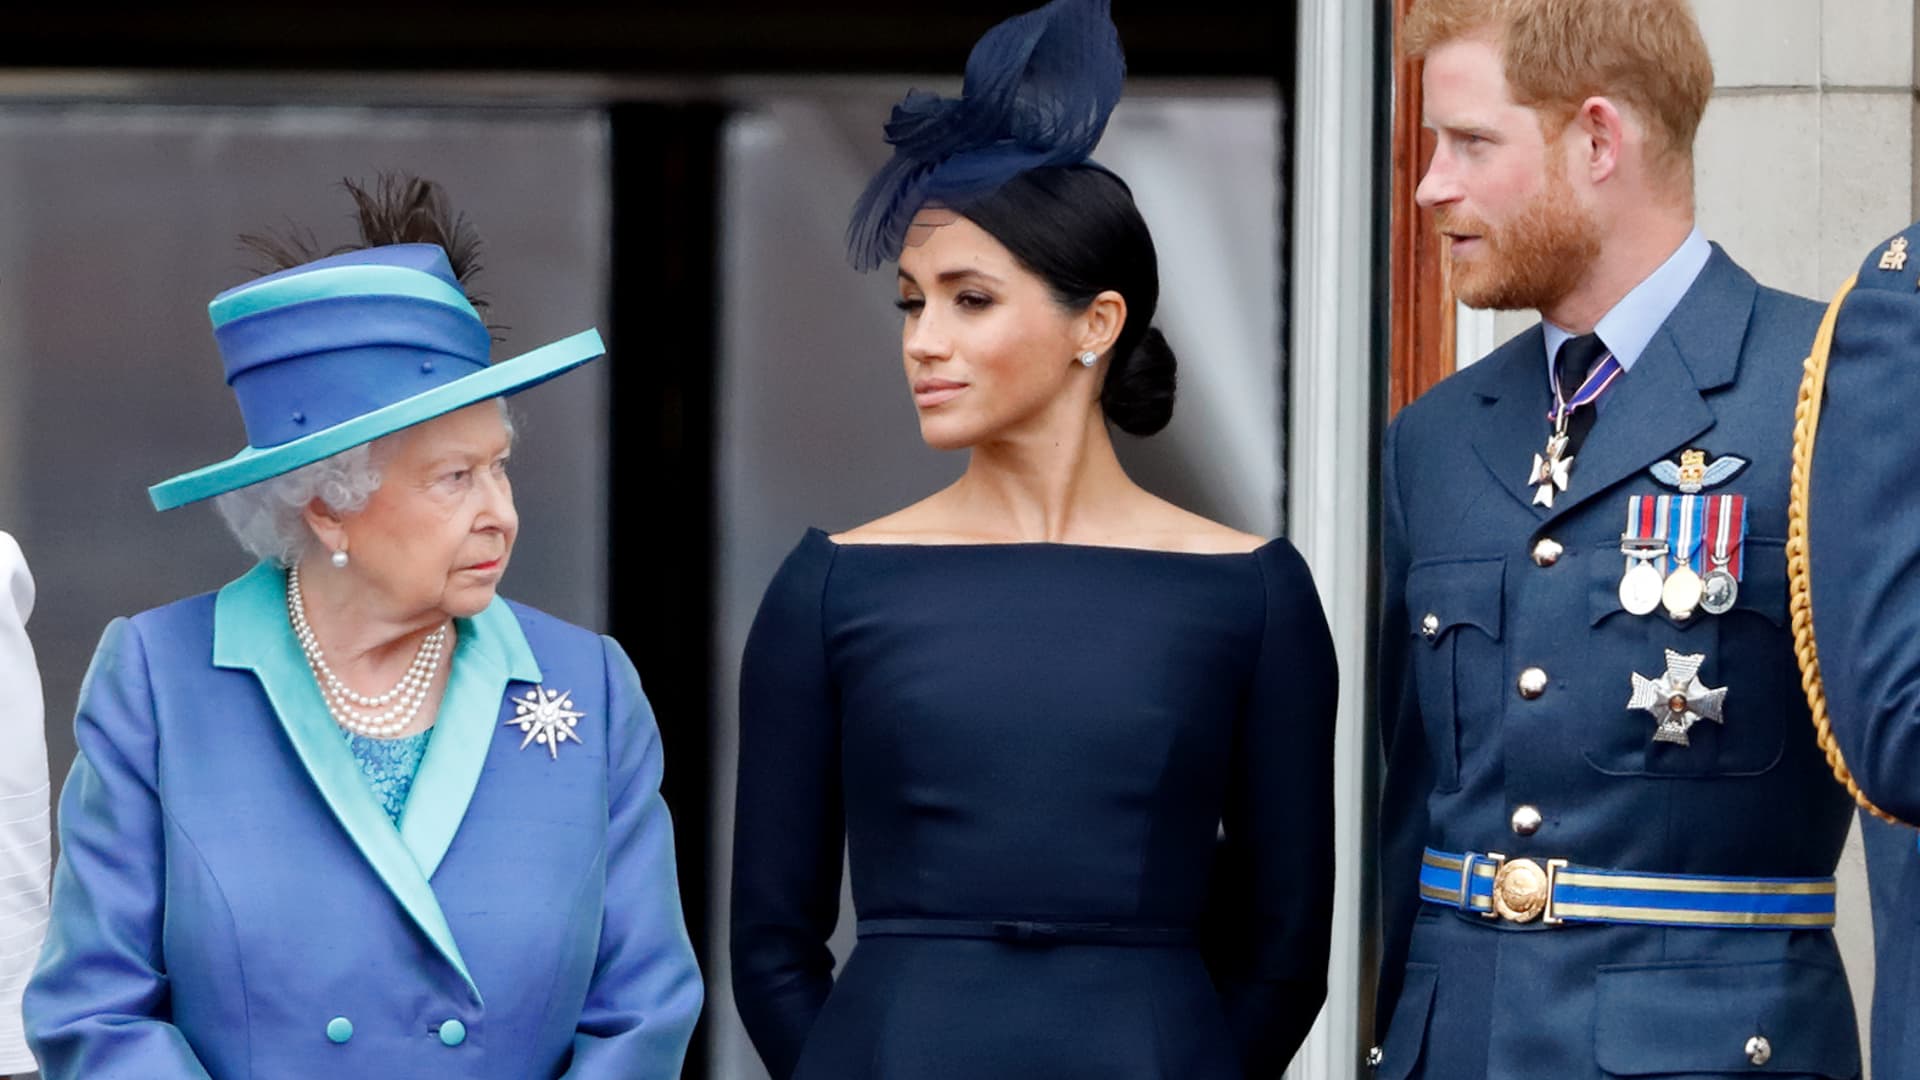 Queen Elizabeth II, Meghan, Duchess of Sussex and Prince Harry, Duke of Sussex watch a flypast to mark the centenary of the Royal Air Force from the balcony of Buckingham Palace on July 10, 2018 in London, England.